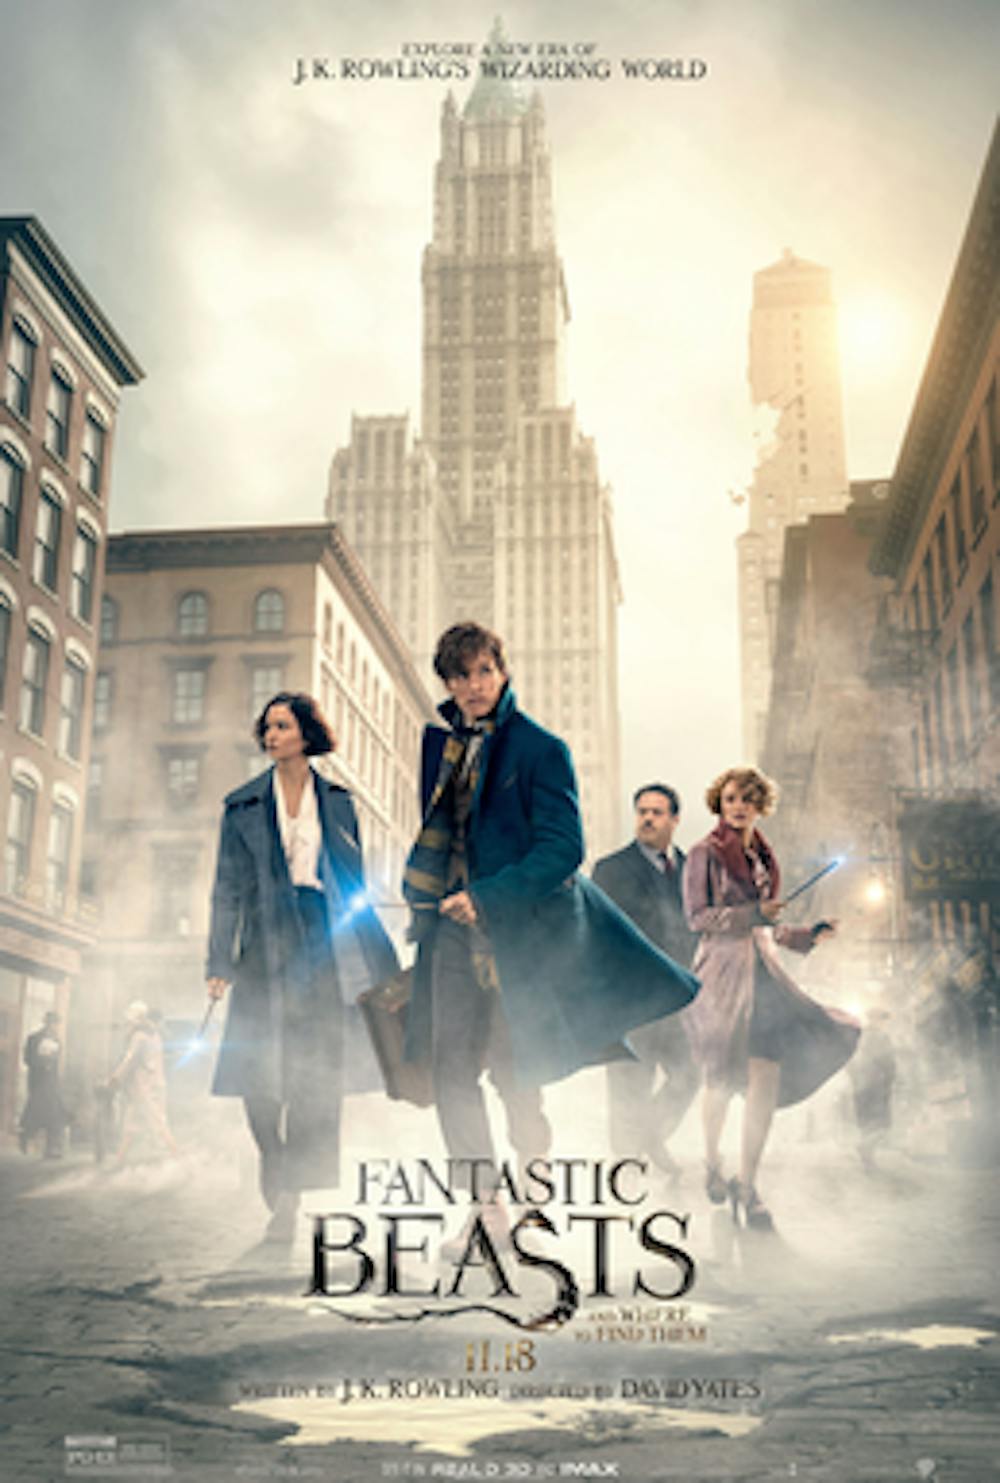 <p>Written by J.K. Rowling and directed by David Yates,&nbsp;"Fantastic Beasts and Where to Find Them"&nbsp;premiered in theaters&nbsp;Nov. 10.&nbsp;&nbsp;</p>